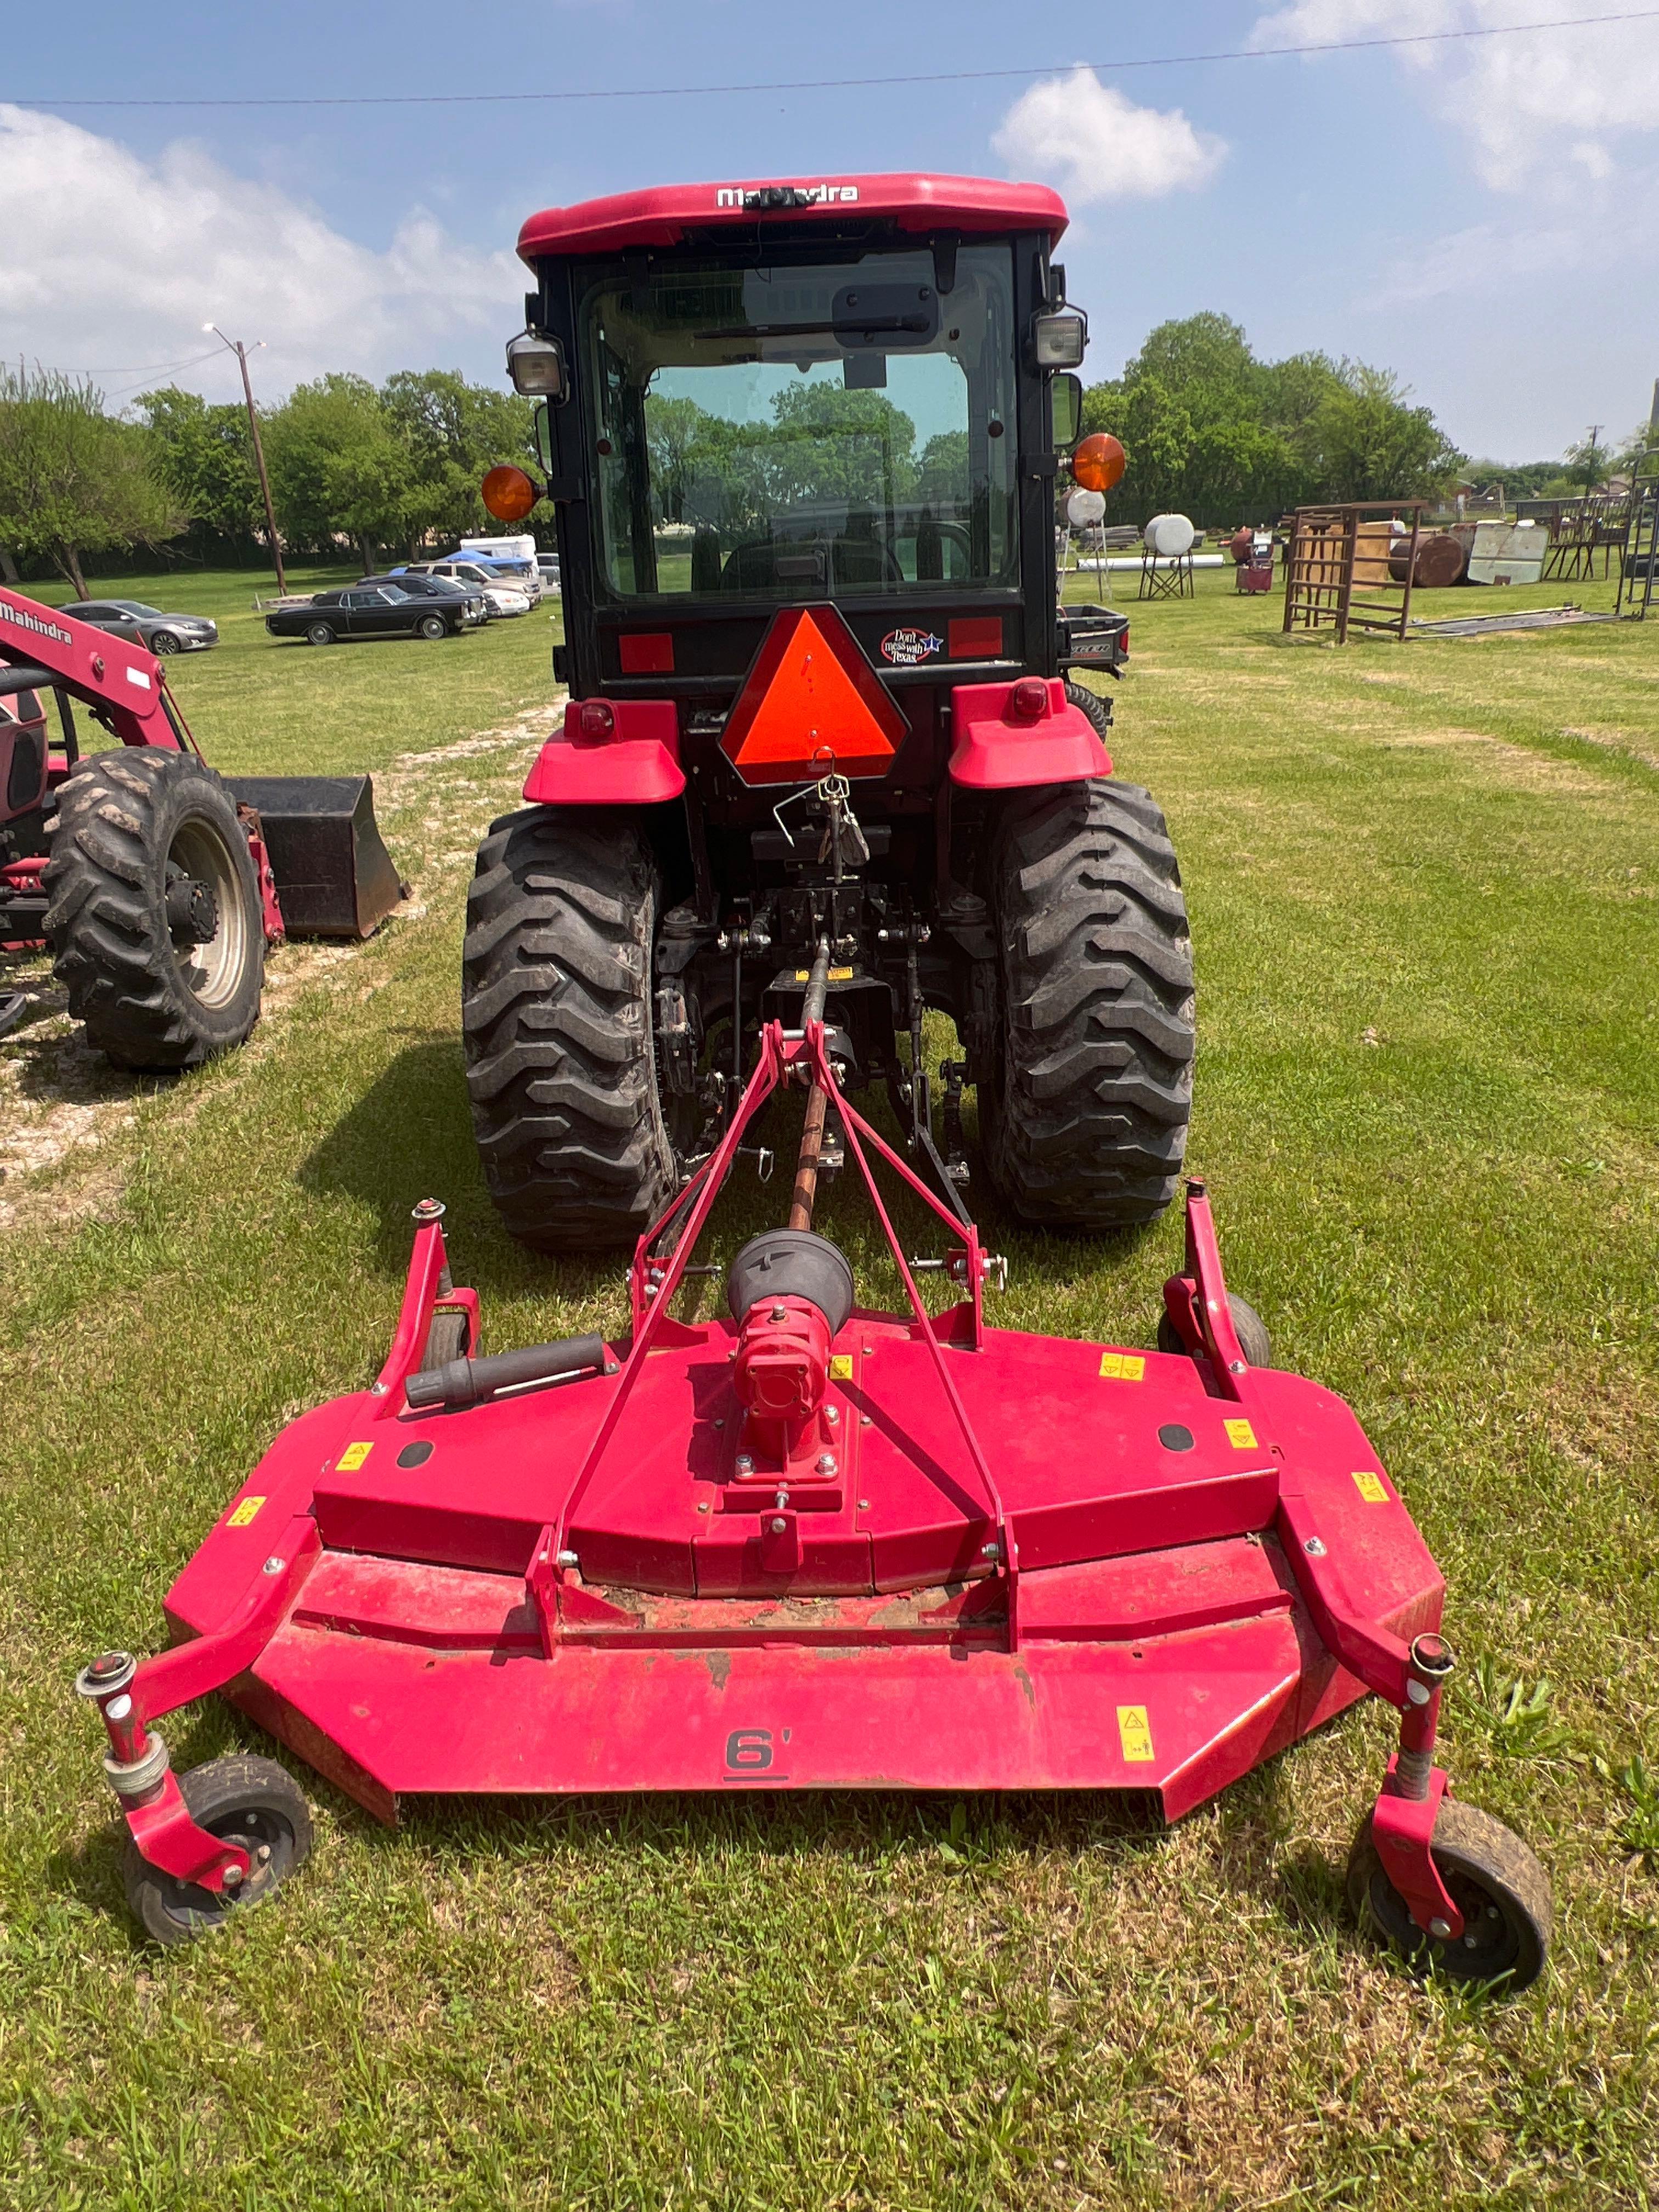 2013 Mahindra 1538 Tractor with Front Loader and 6 foot Finish Mower - 550.9 hours - Super clean.